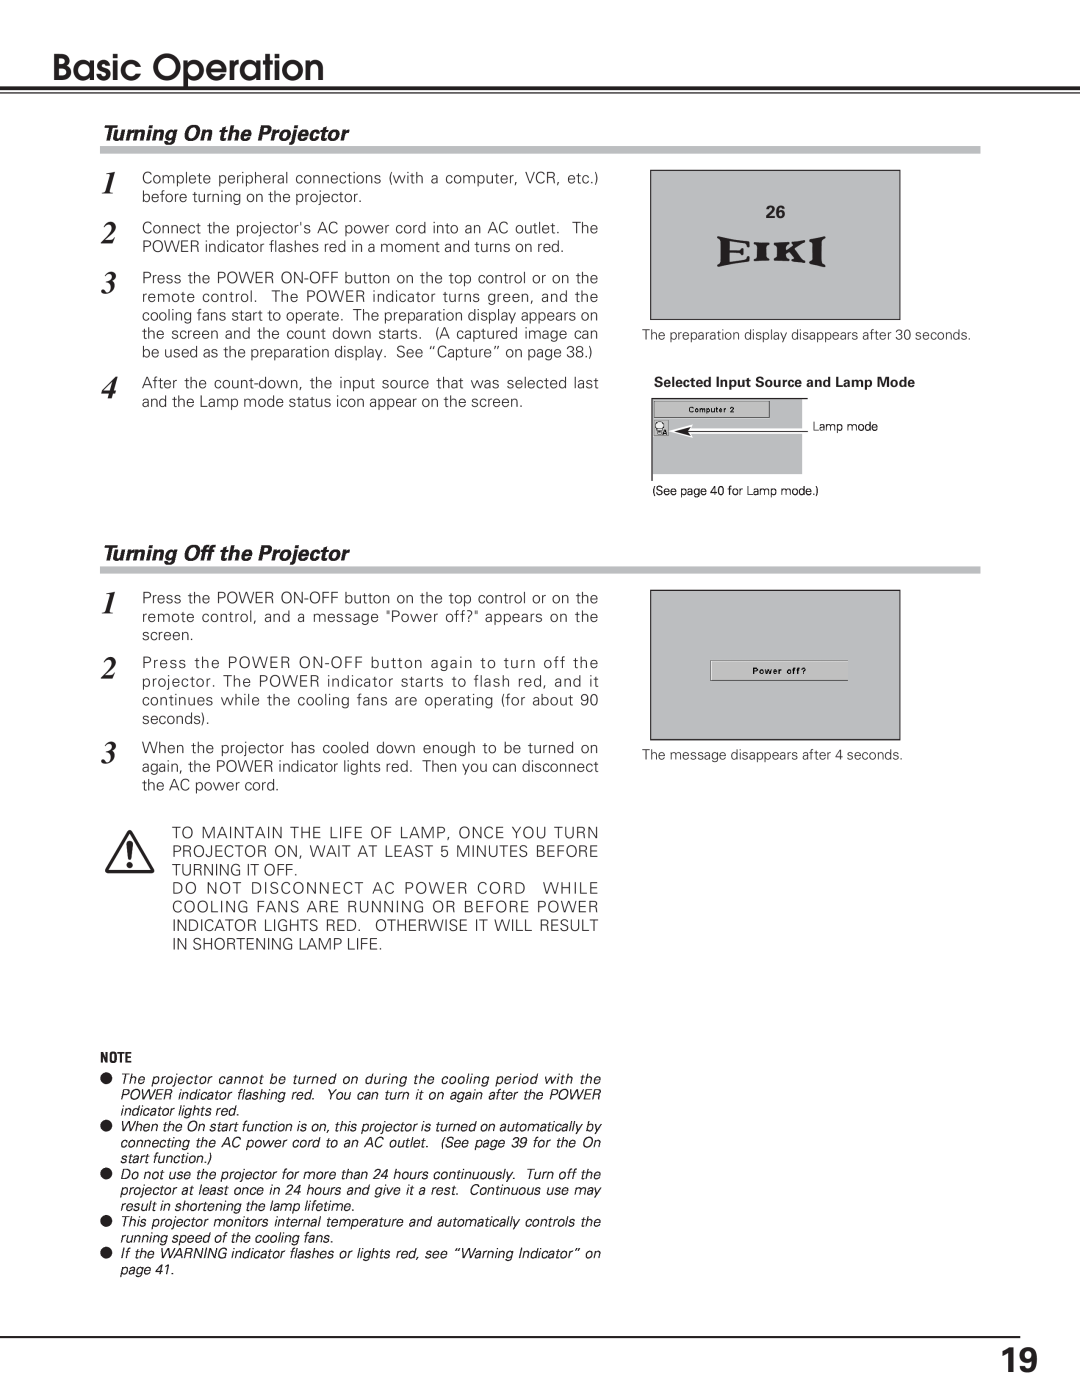 Eiki LC-XB25, LC-SB20, LC-XB20 owner manual Basic Operation, Turning On the Projector, Turning Off the Projector 